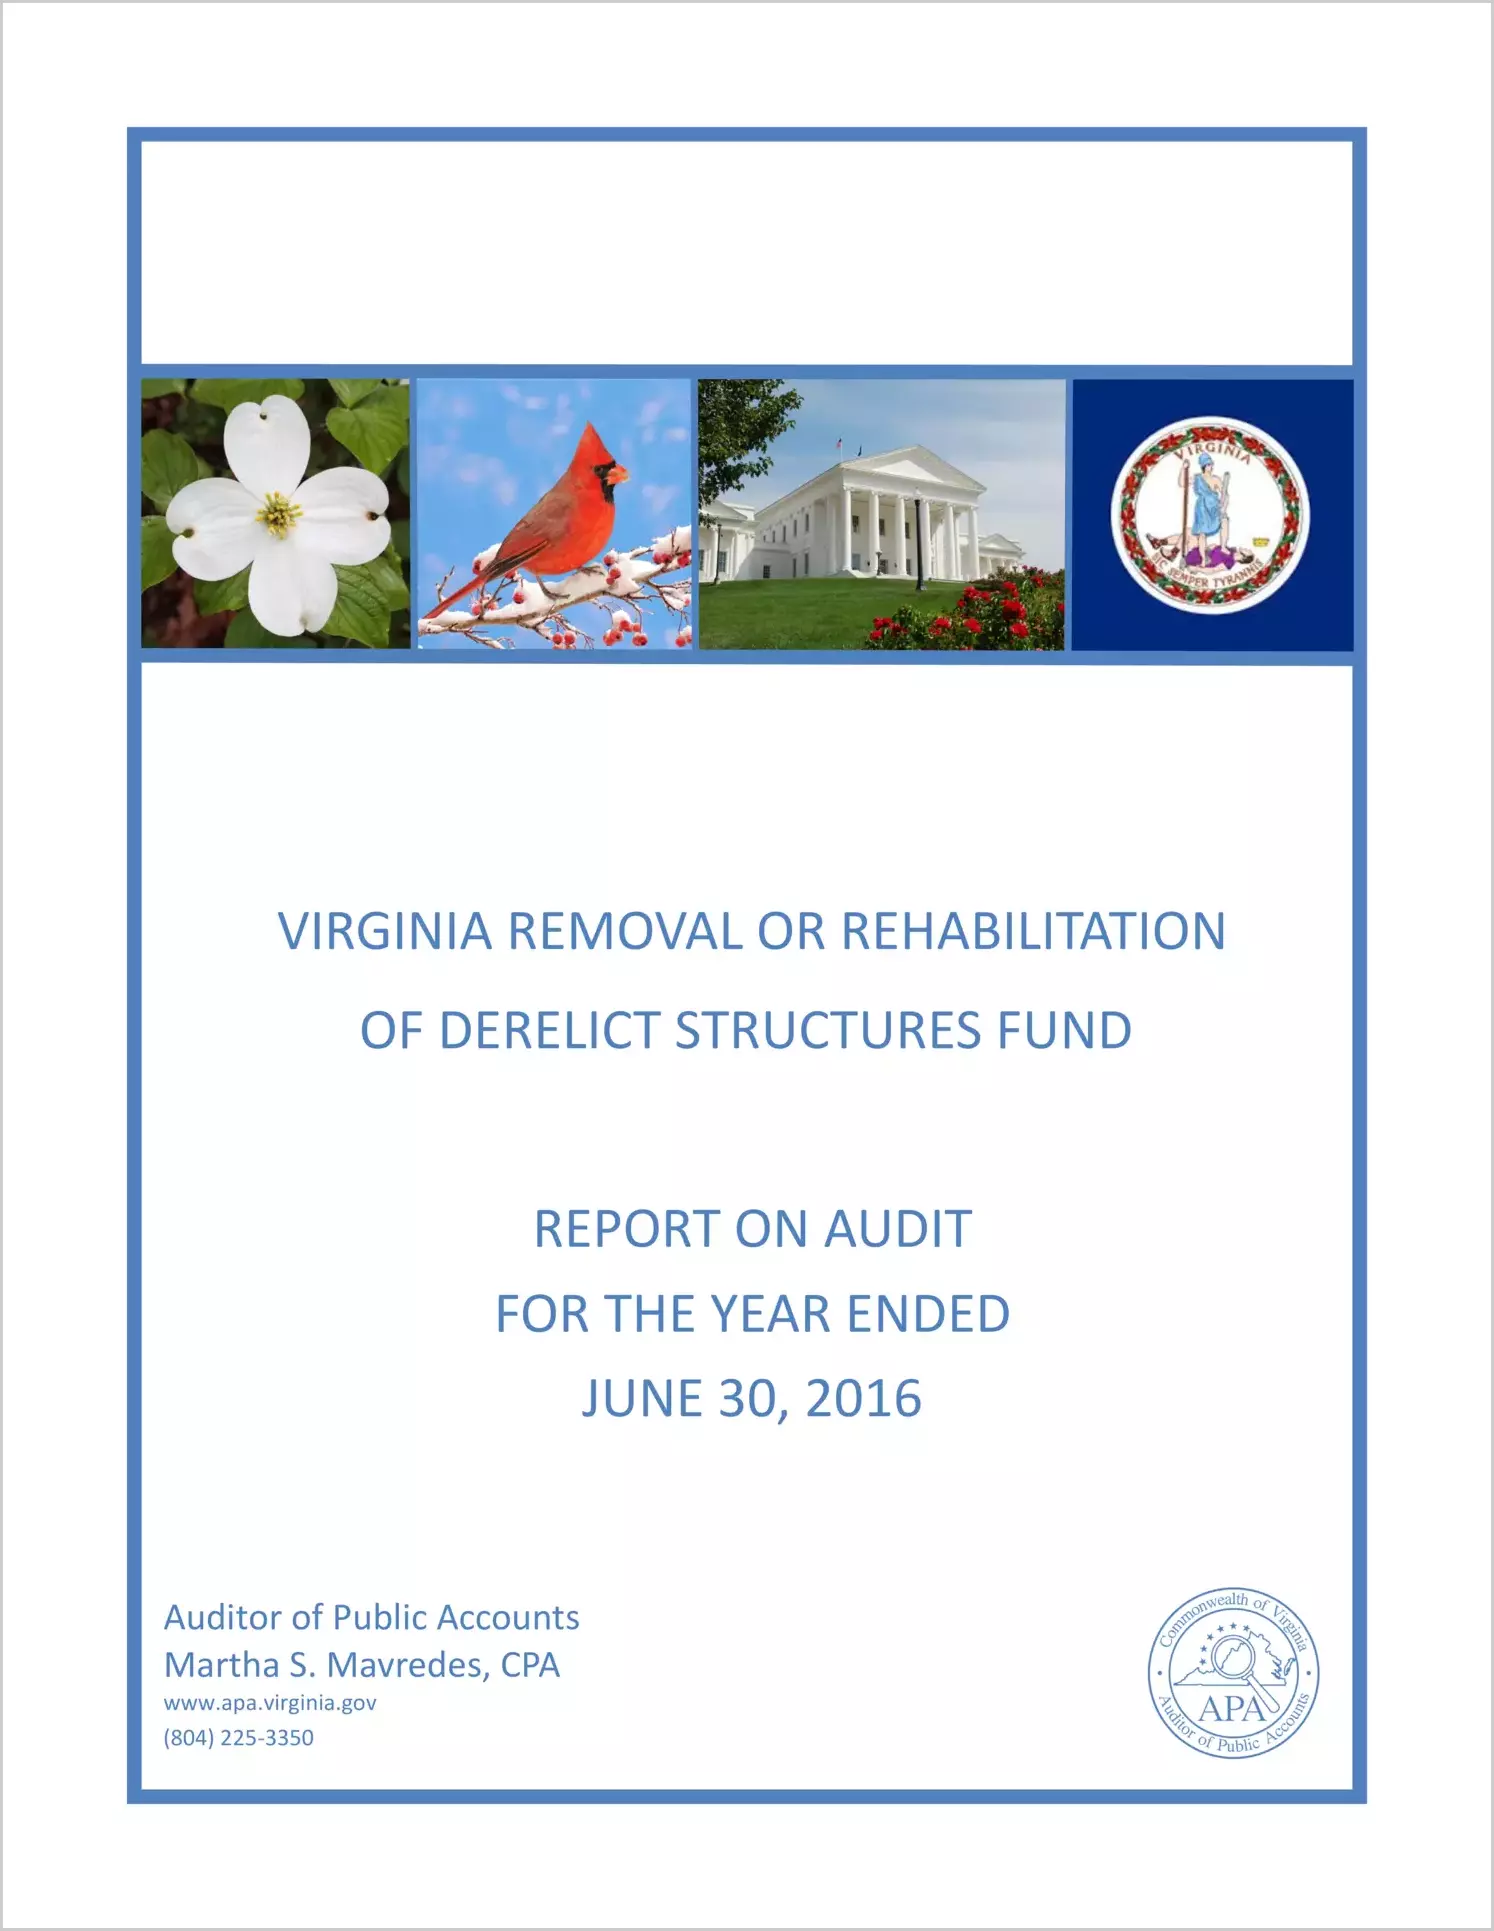 Virginia Removal or Rehabilitation of Derelict Structures Fund for the year ended June 30, 2016